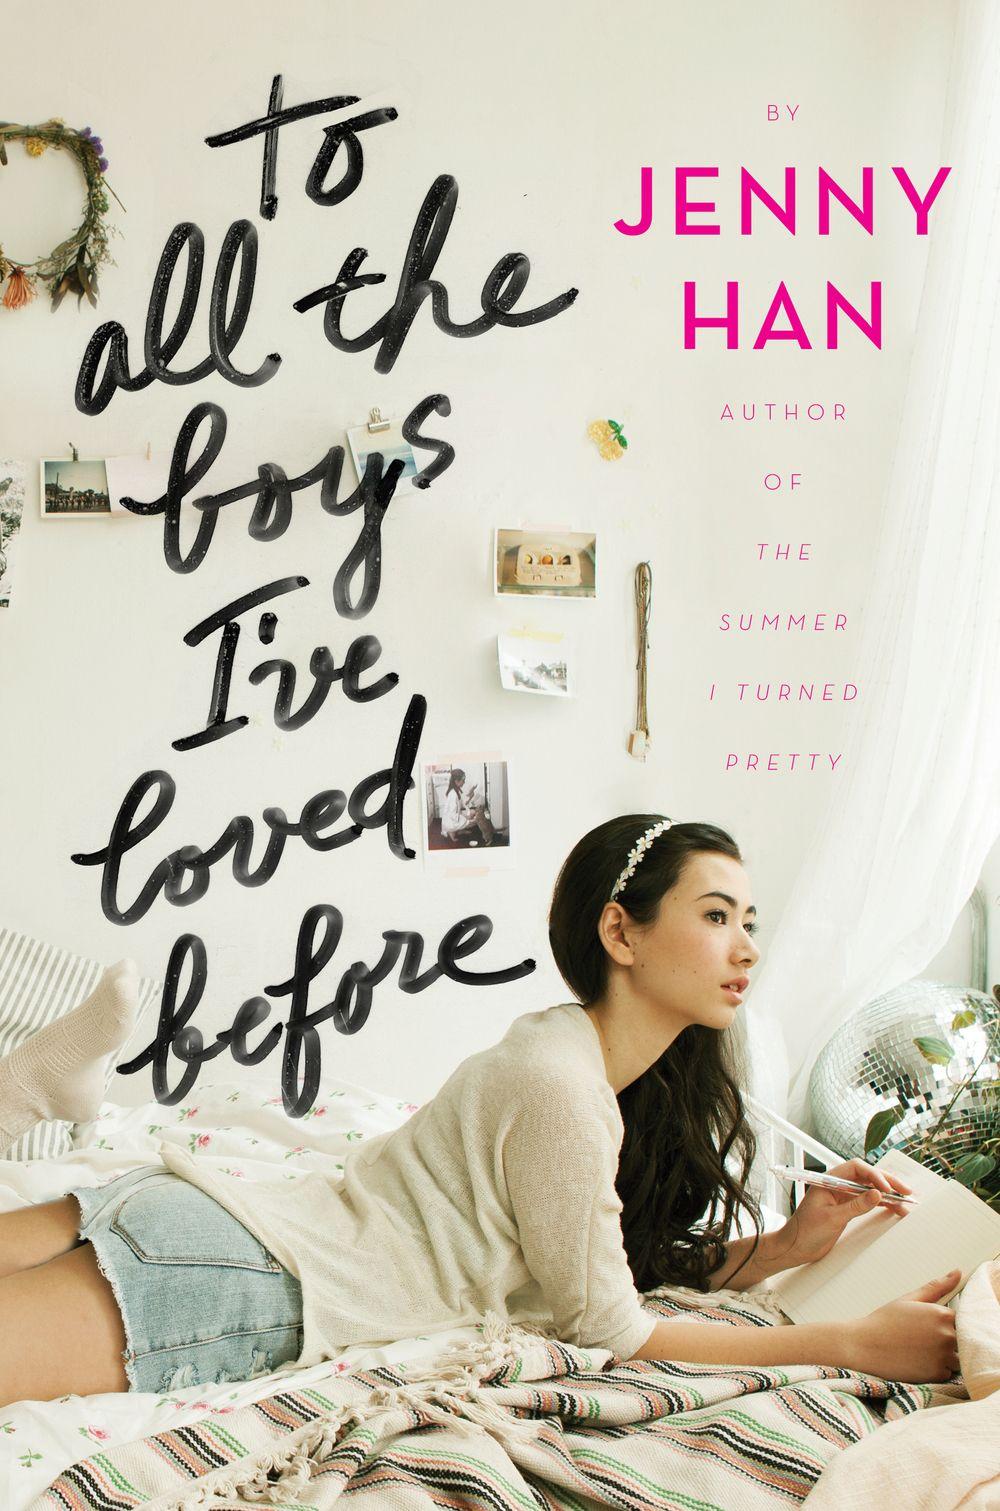 Jenny Han's 'To All The Boys I've Loved Before' Book Review